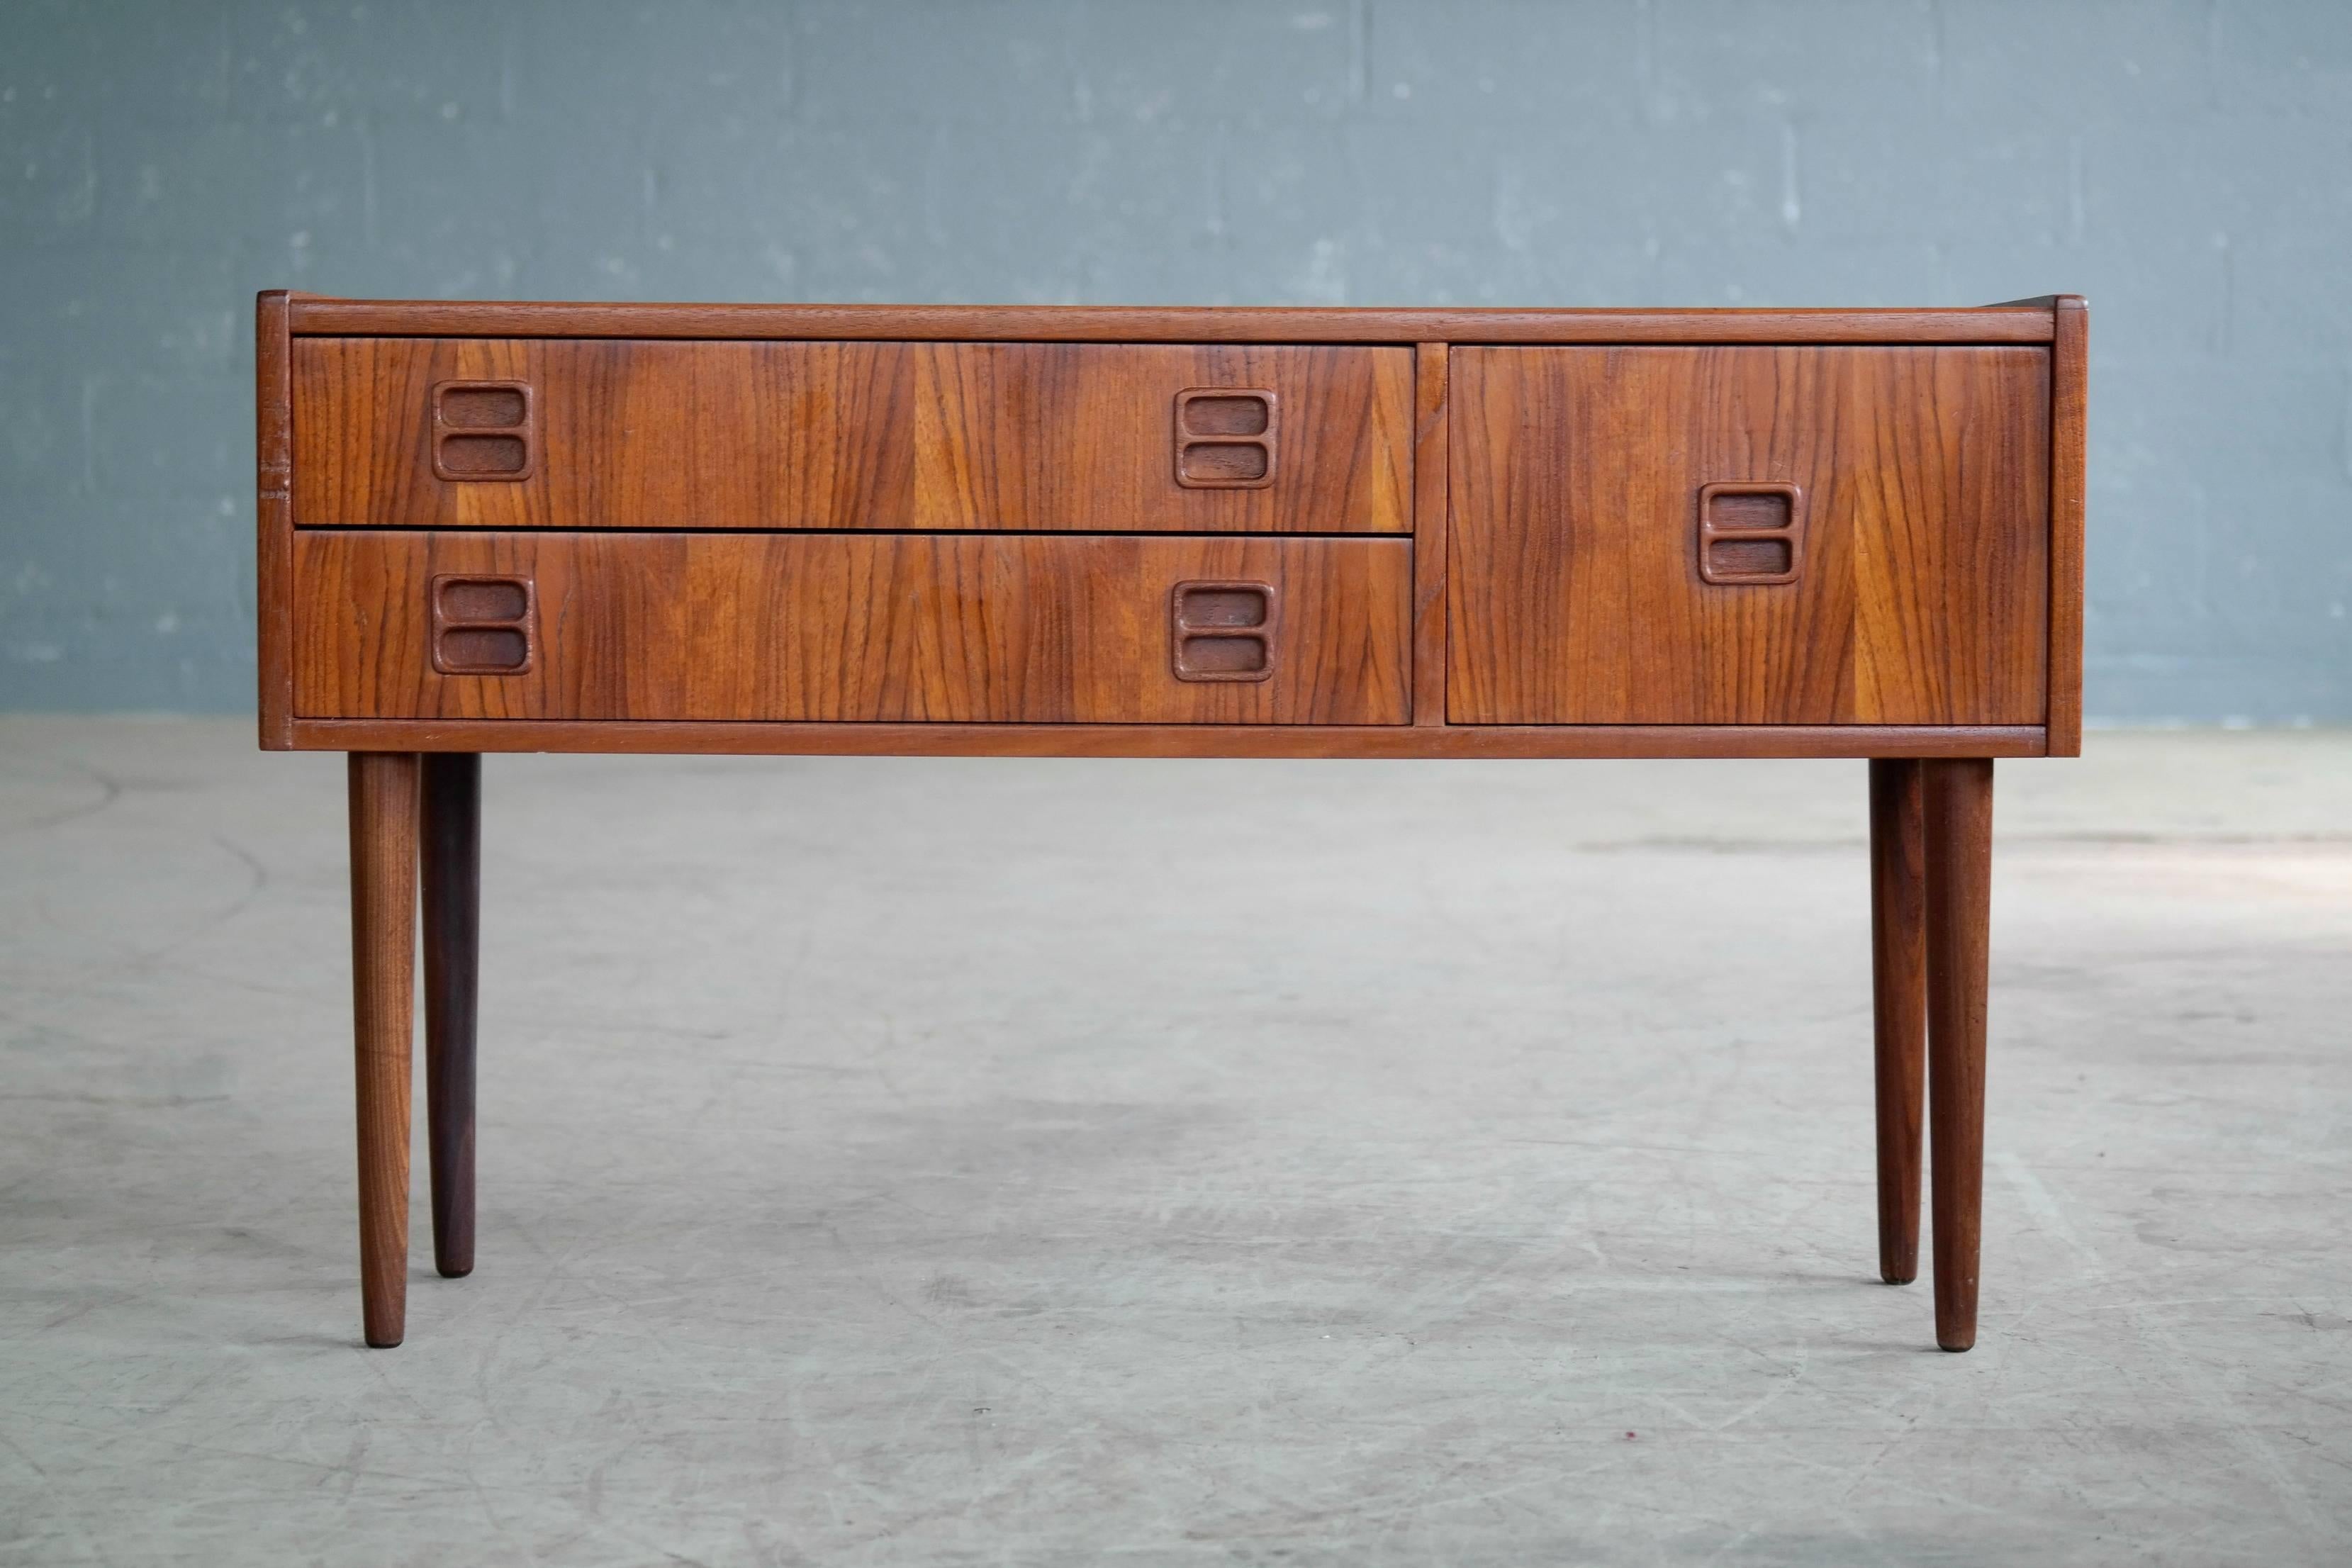 Unusual low console or chest of drawers in teak by Kai Kristiansen. Beautiful color and grain with carved pulls. Unique drawer configuration. Low and wide cabinet on tall legs in solid teak creating a very elegant look. Very versatile with multiple